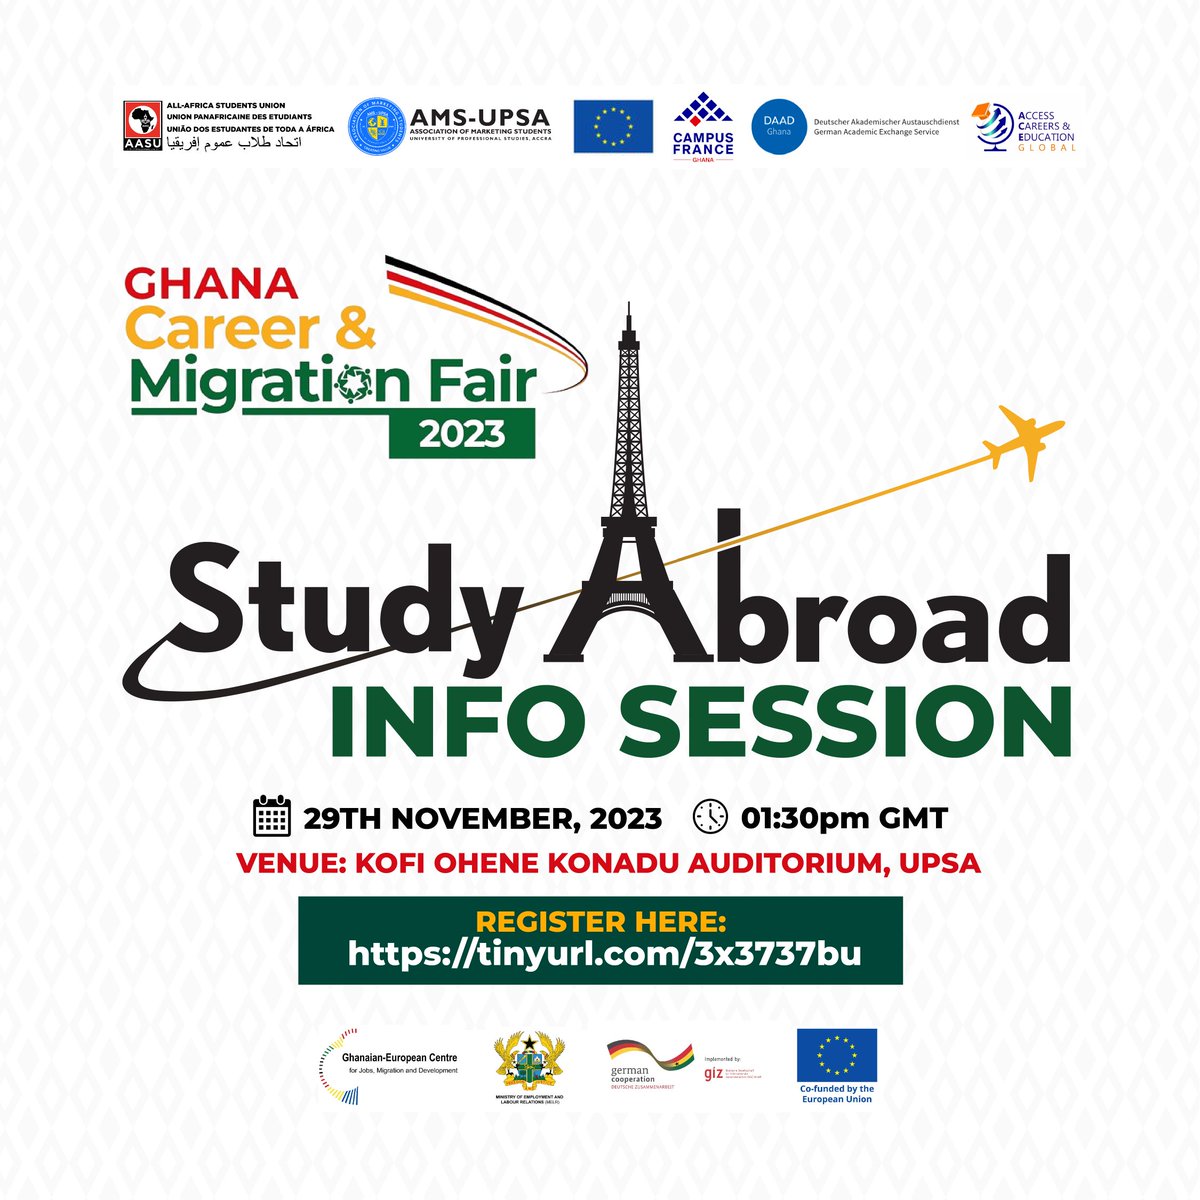 Are you interested in pursuing further education in the UK and EU countries? Register here for the UPSA session of the Study Abroad Info Session at the Ghana Career and Migration Fair 2023: tinyurl.com/3x3737bu Register here for the main conference: rb.gy/kg1gje